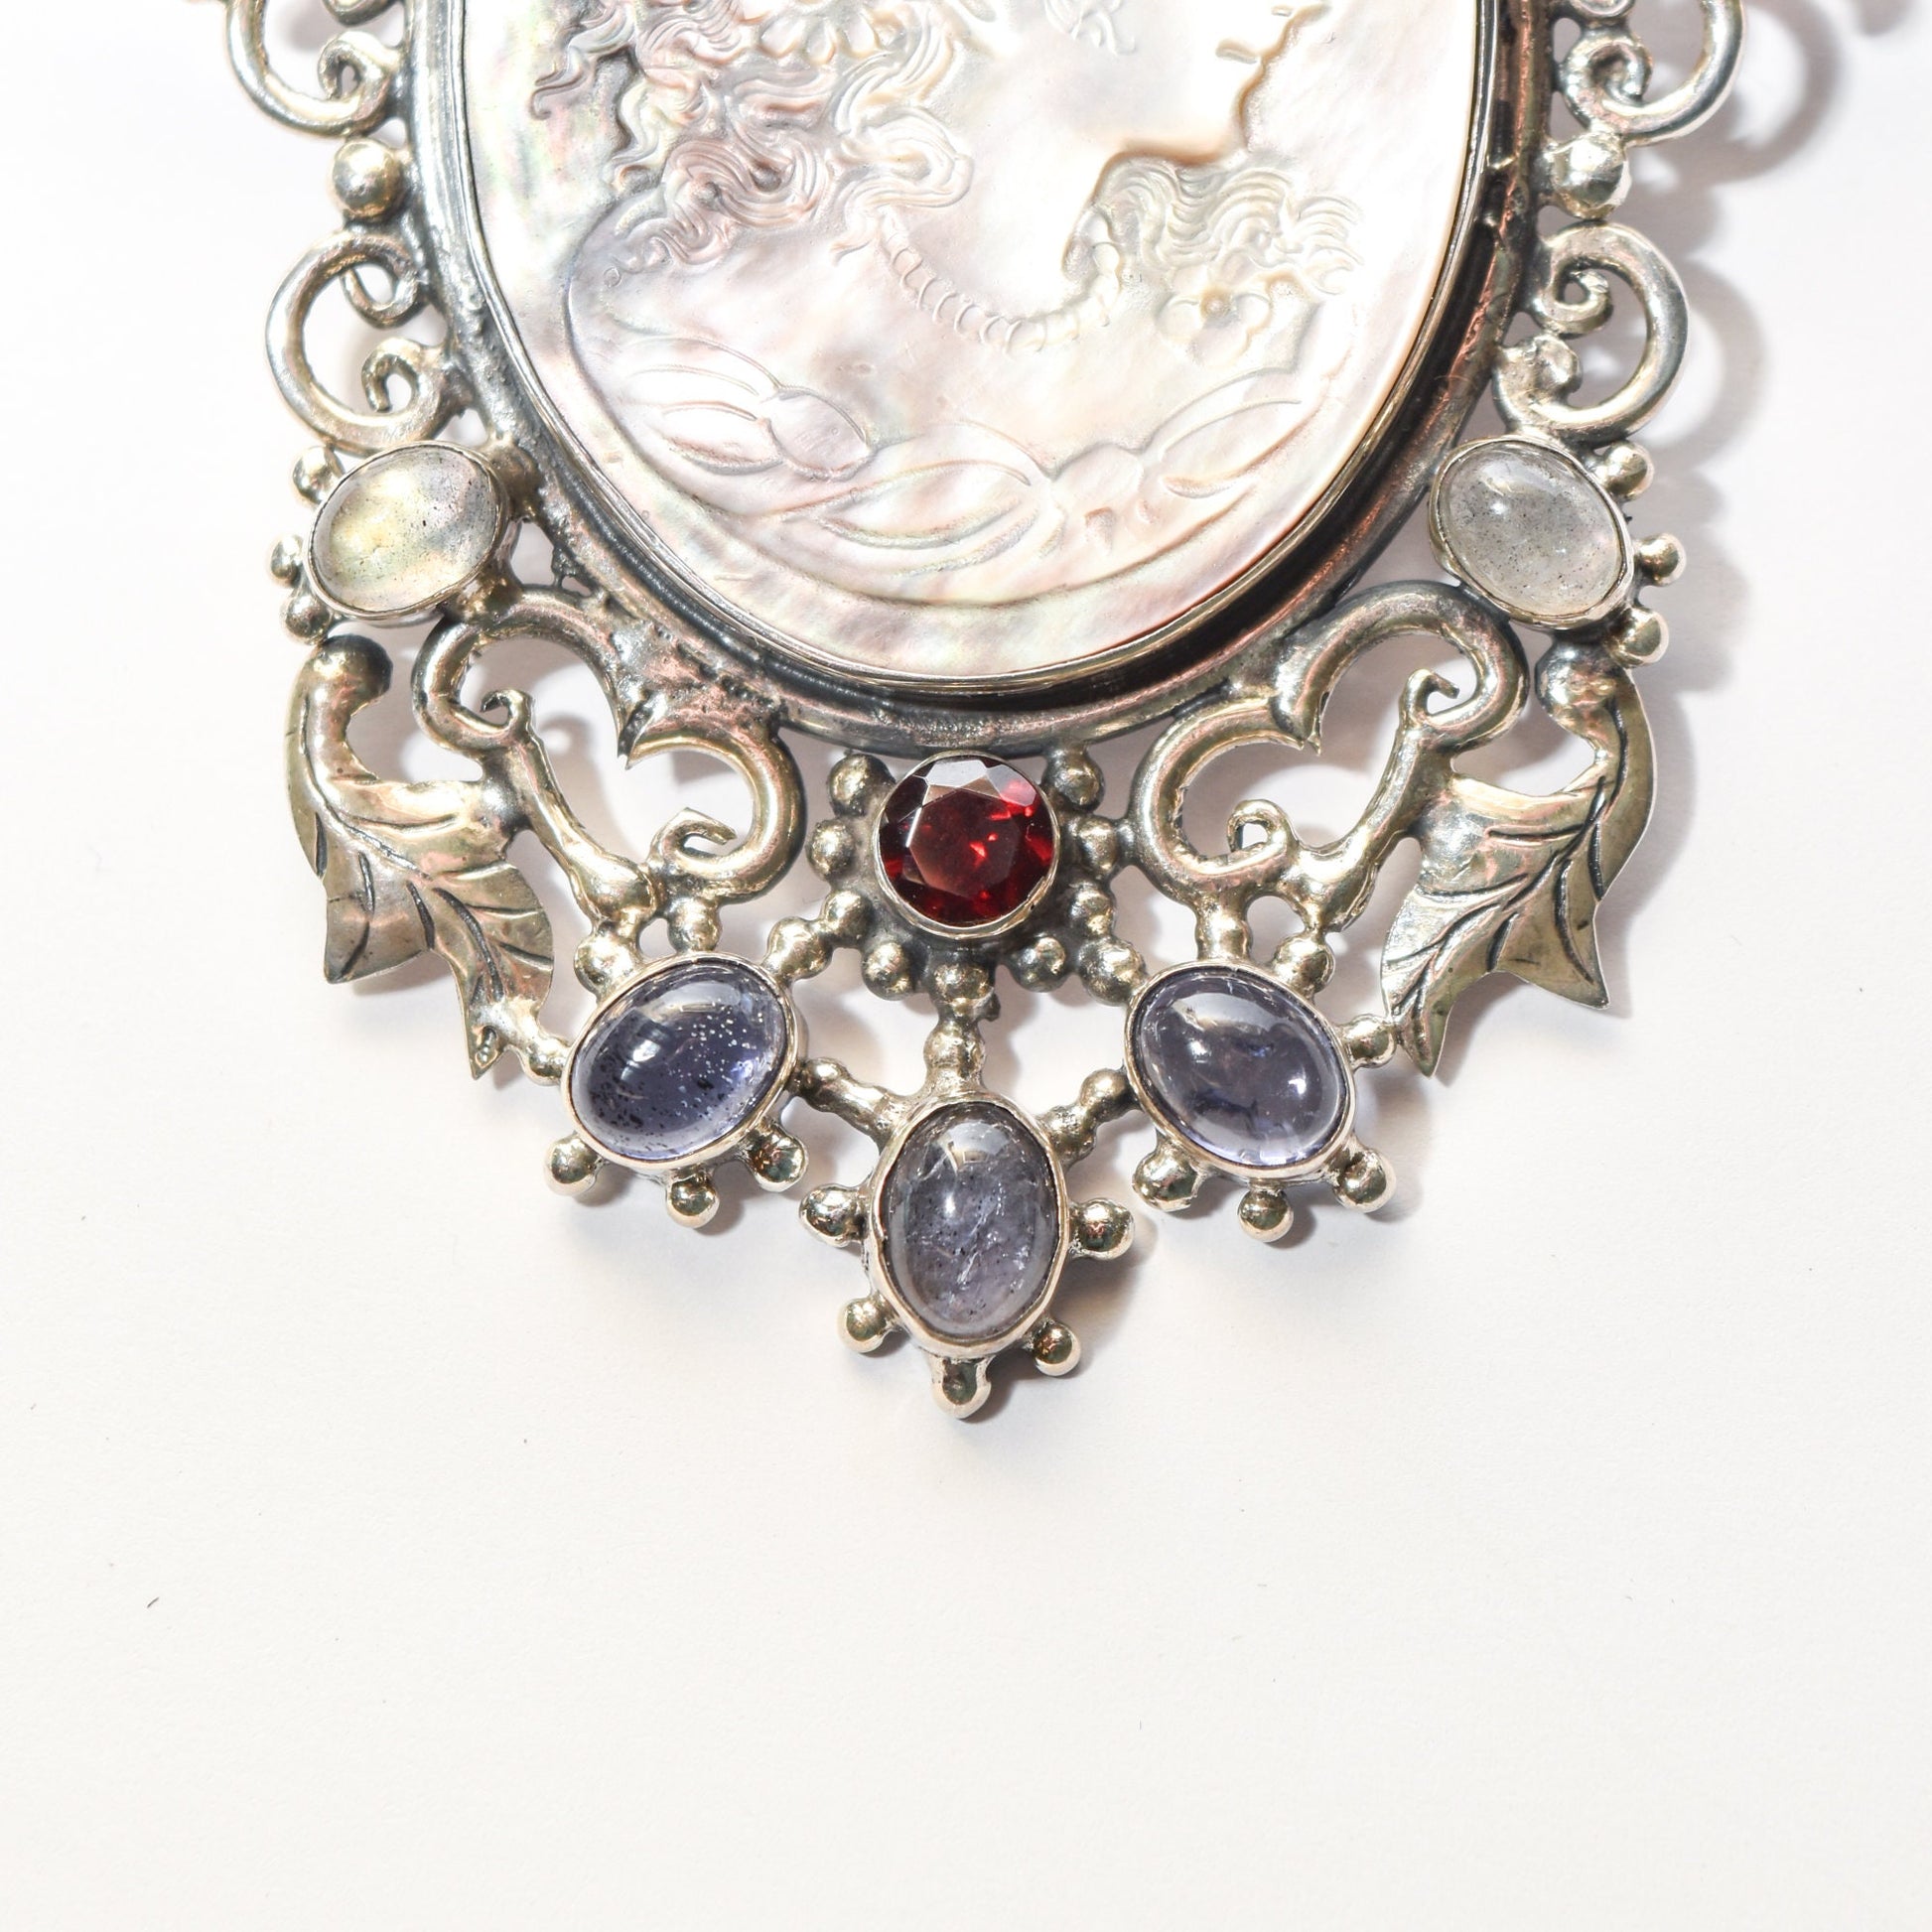 Victorian style sterling silver cameo pendant brooch with ornate multi-stone design featuring red gem centerpiece and dangling oval stones, 4 inches long.